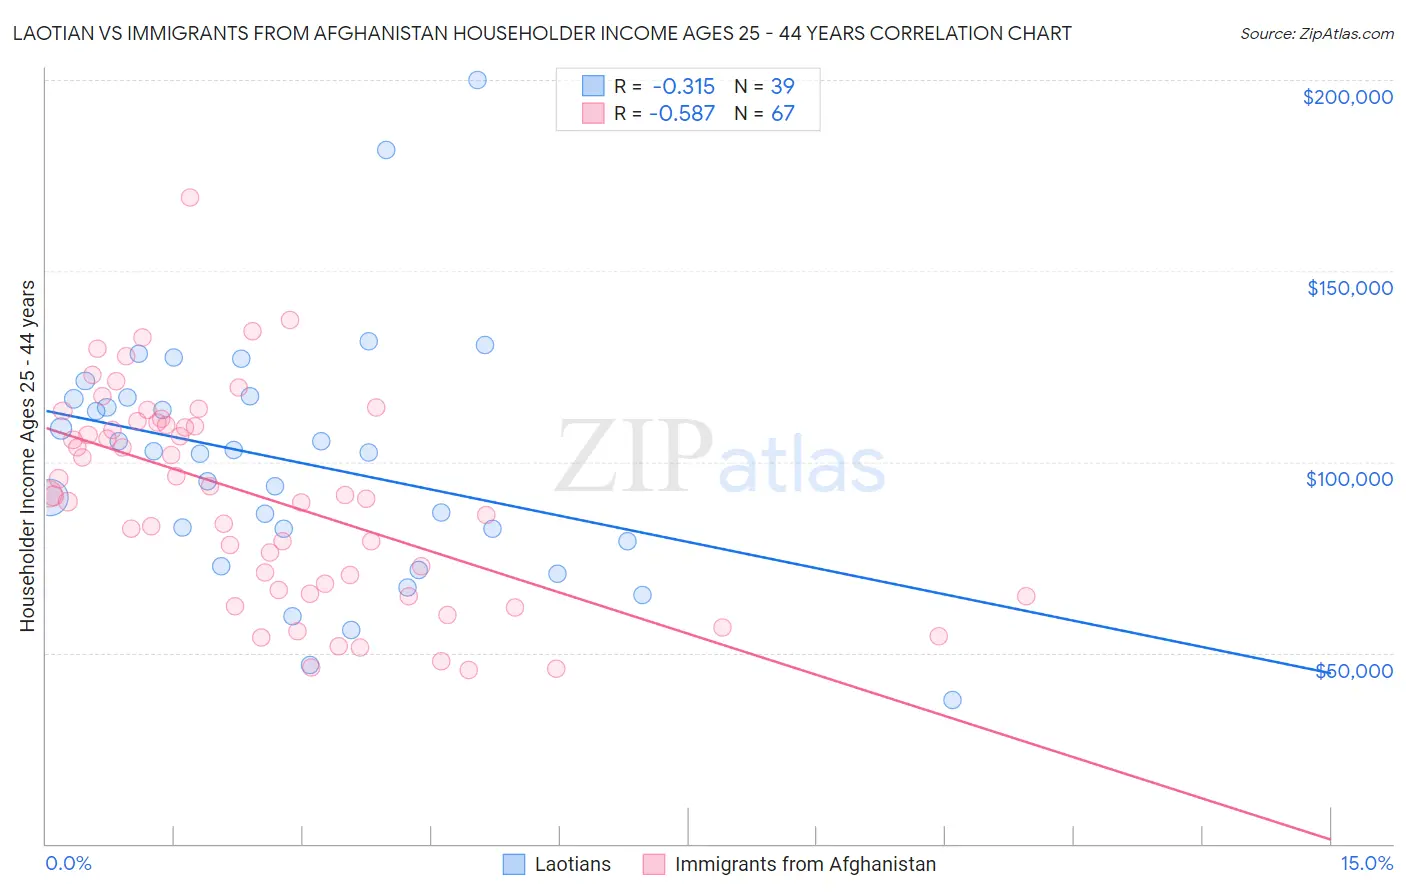 Laotian vs Immigrants from Afghanistan Householder Income Ages 25 - 44 years